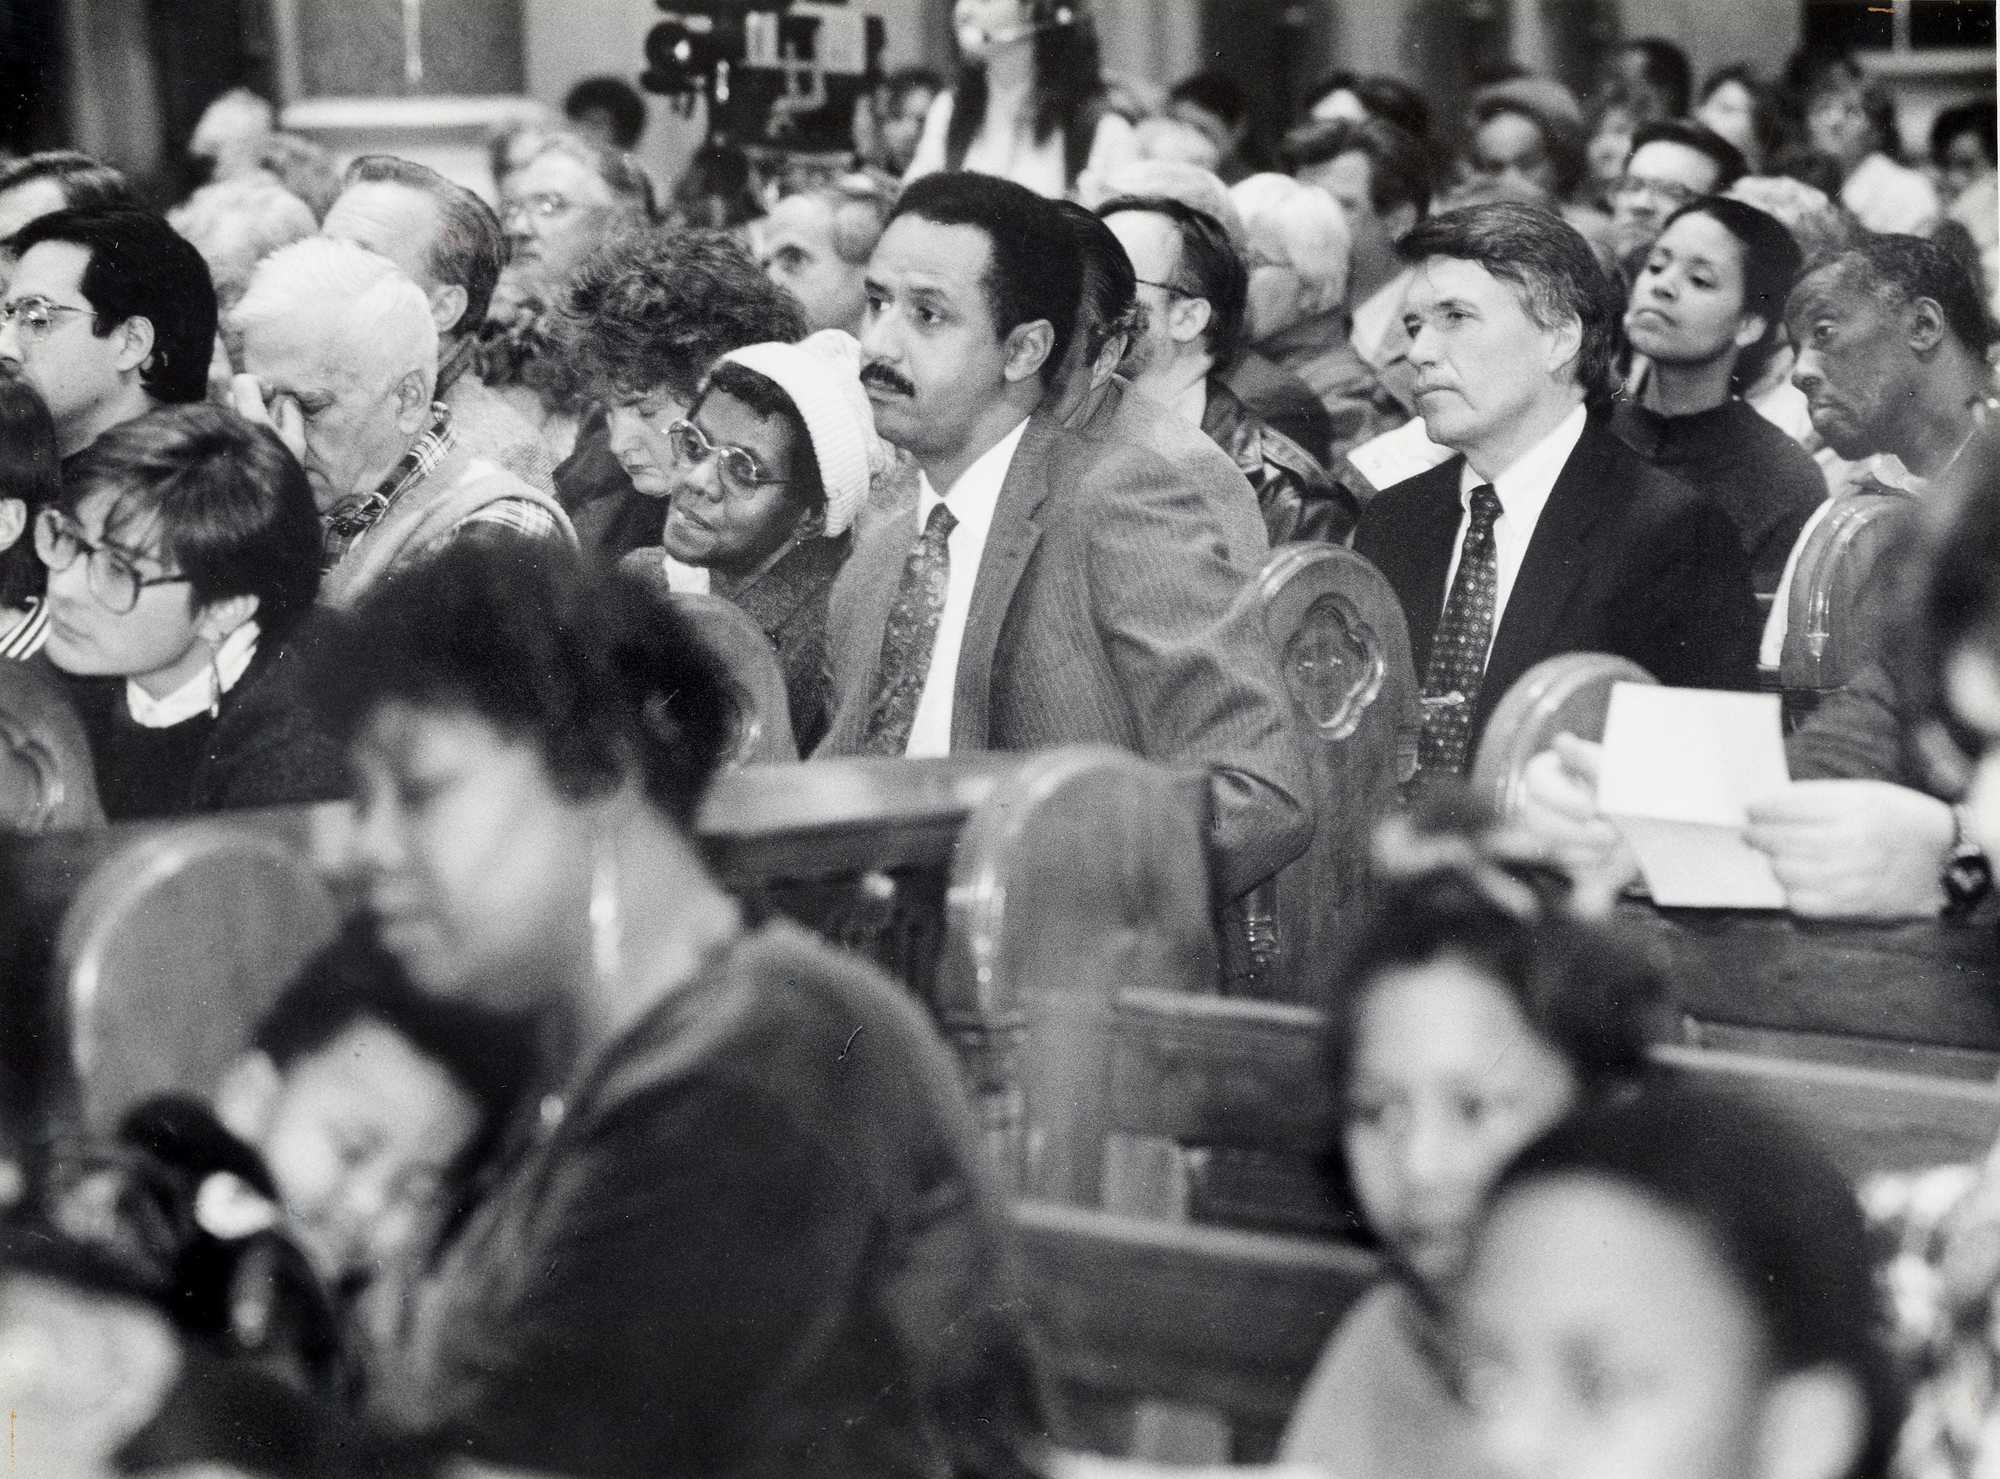 Hundreds of people including Boston Police Commissioner Francis M. "Mickey" Roache (right center) gathered for a prayer service at the Mission Church in Mission Hill on Jan. 9, 1990. About three months prior, 300 people came to Mission Church to pray for Carol and Charles Stuart, who were shot on Oct. 23, 1989.